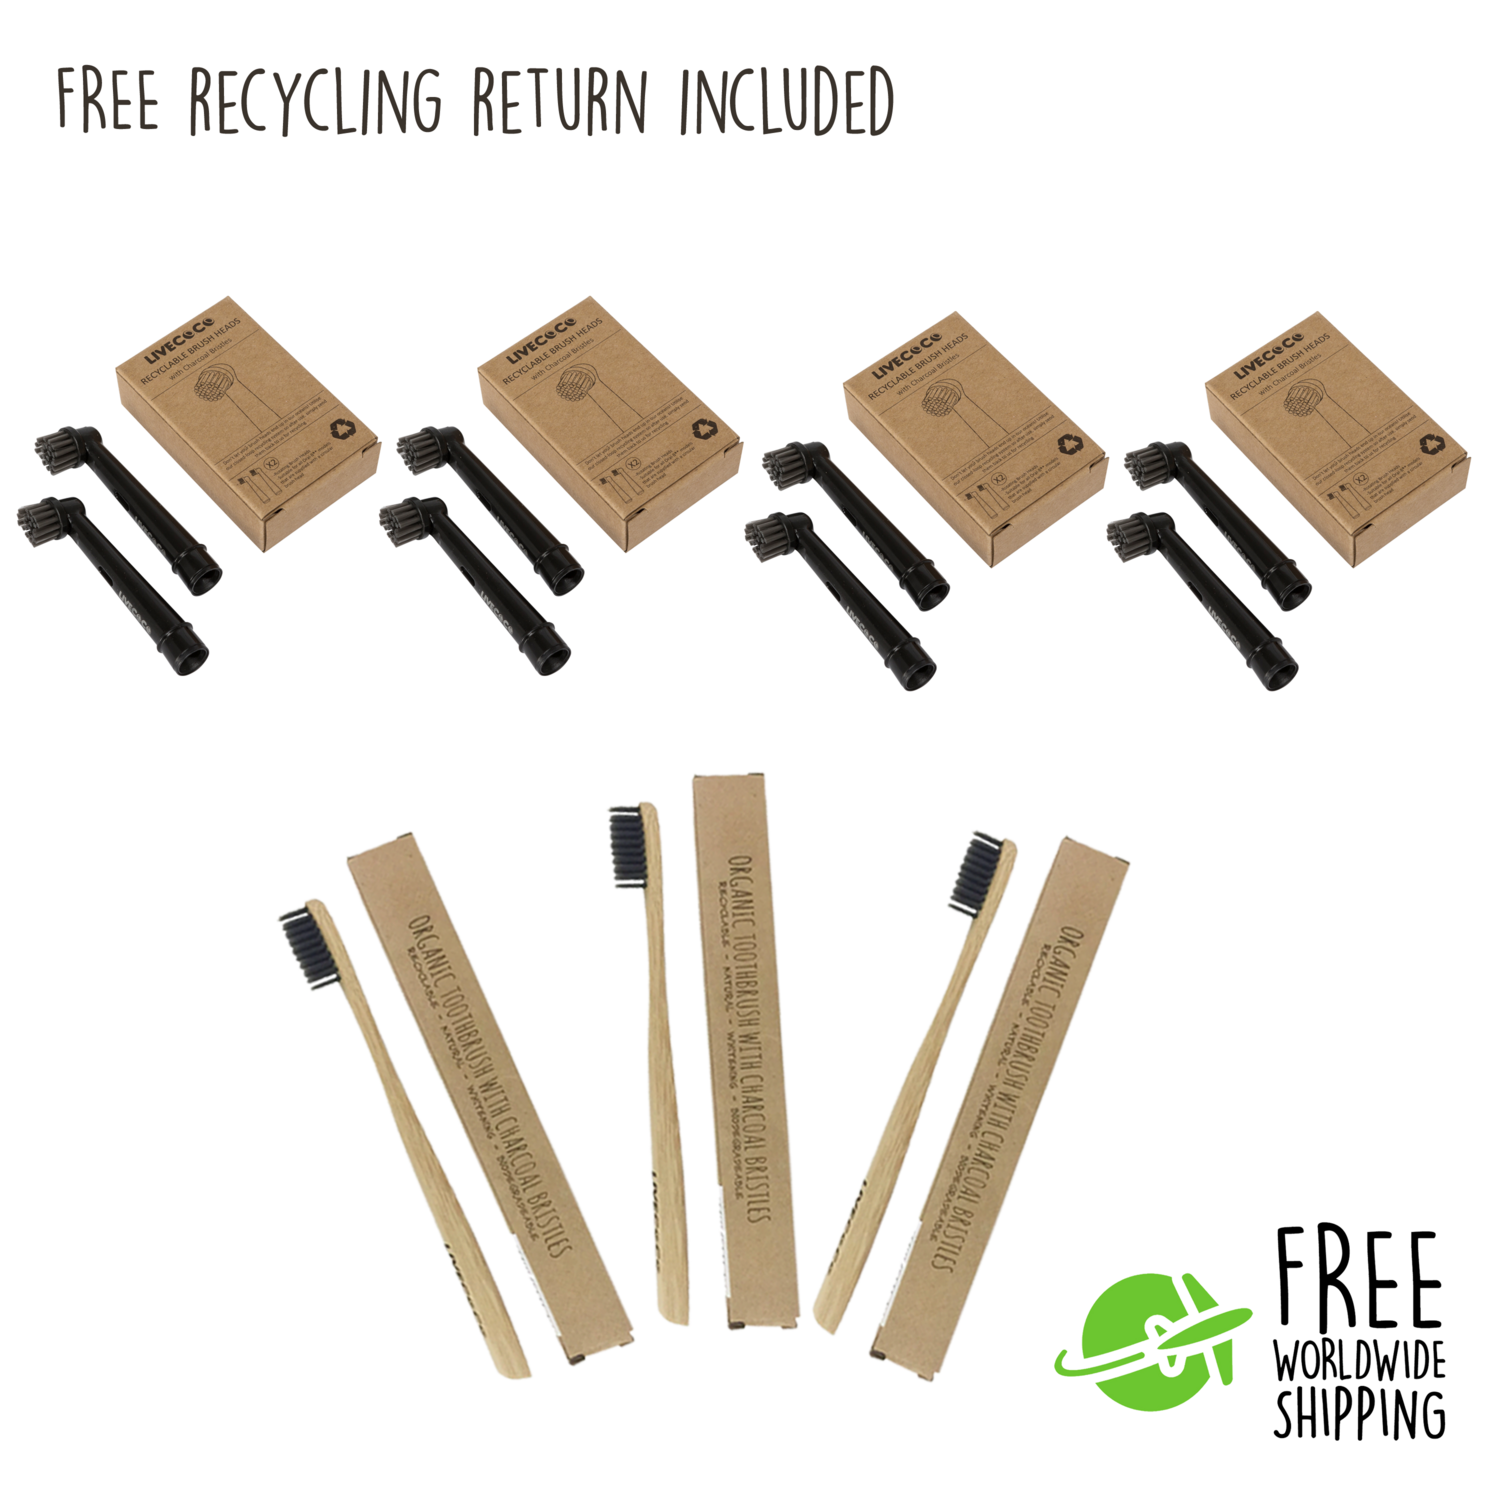 Zero Waste Recyclable Dental Care - Family Pack